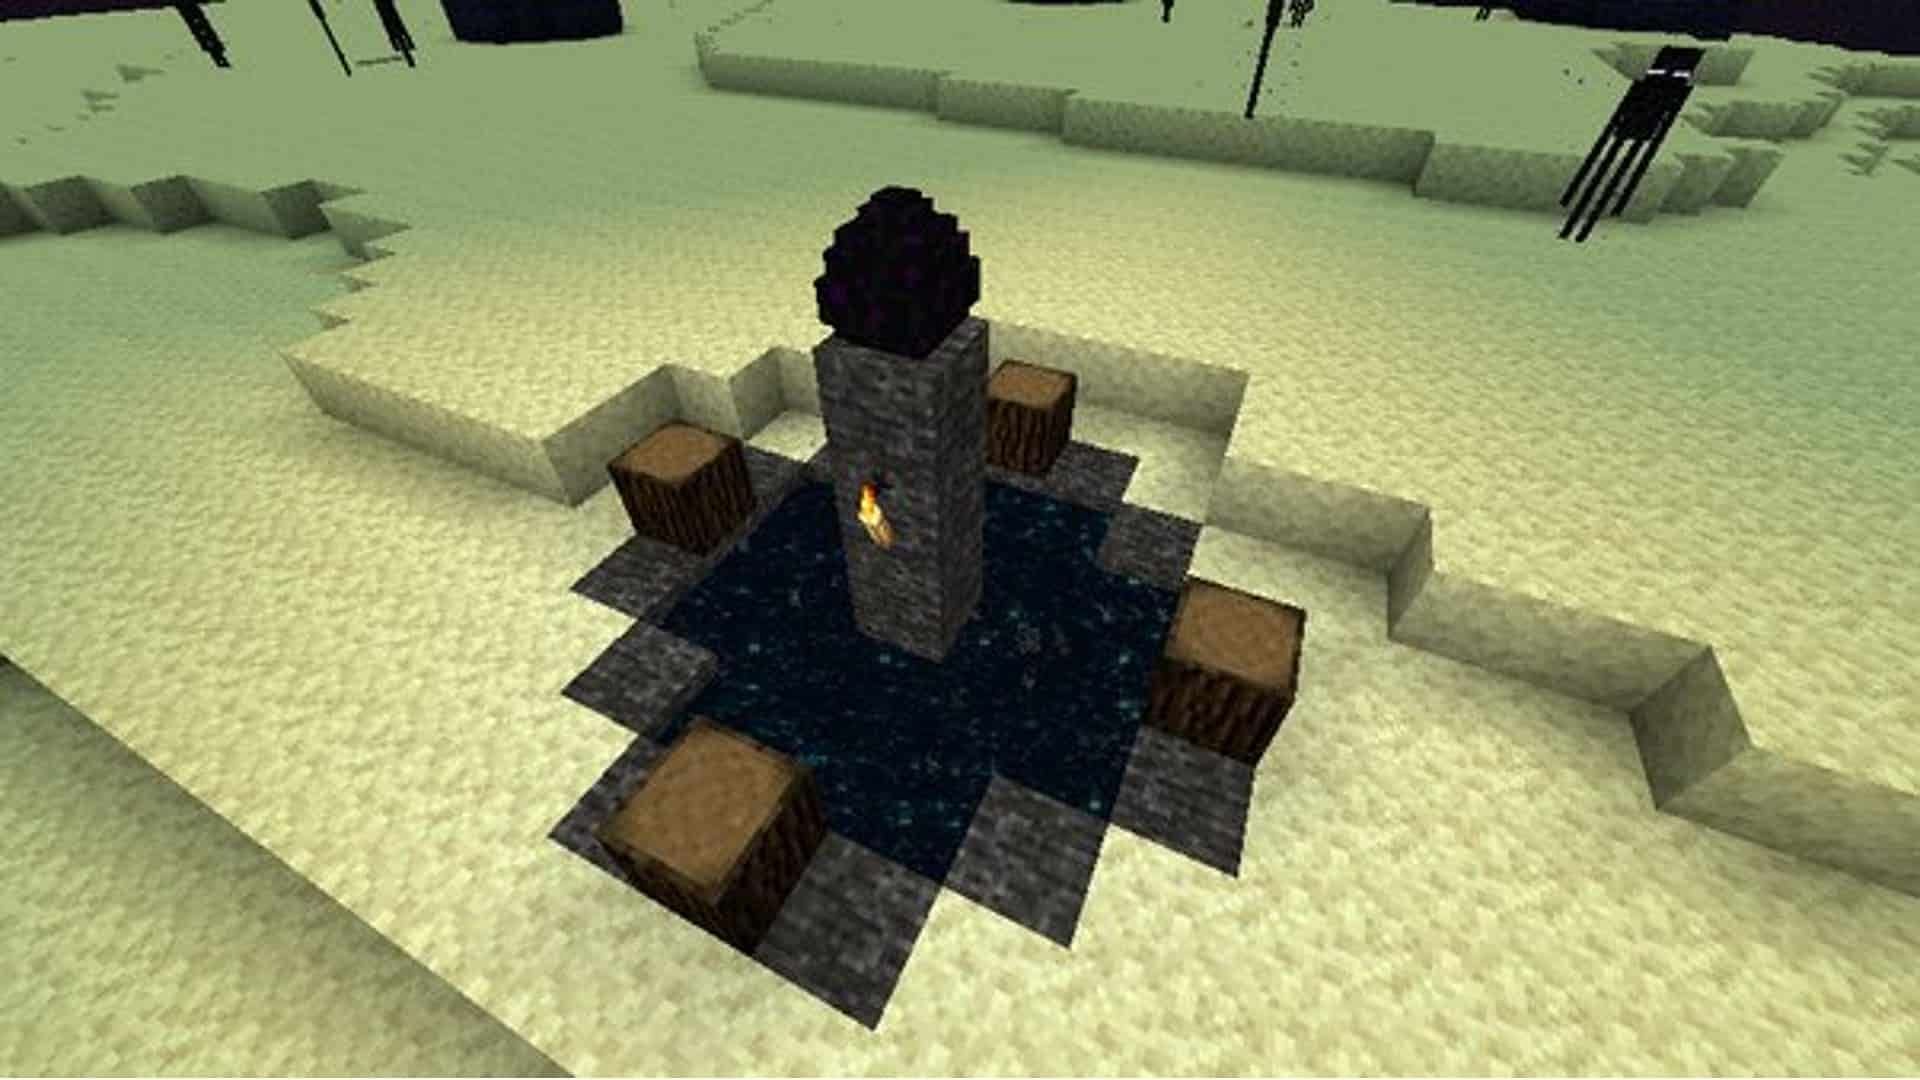 The Ender Dragon&#039;s egg is hard to obtain but for no real use past decoration (Image via Mojang)